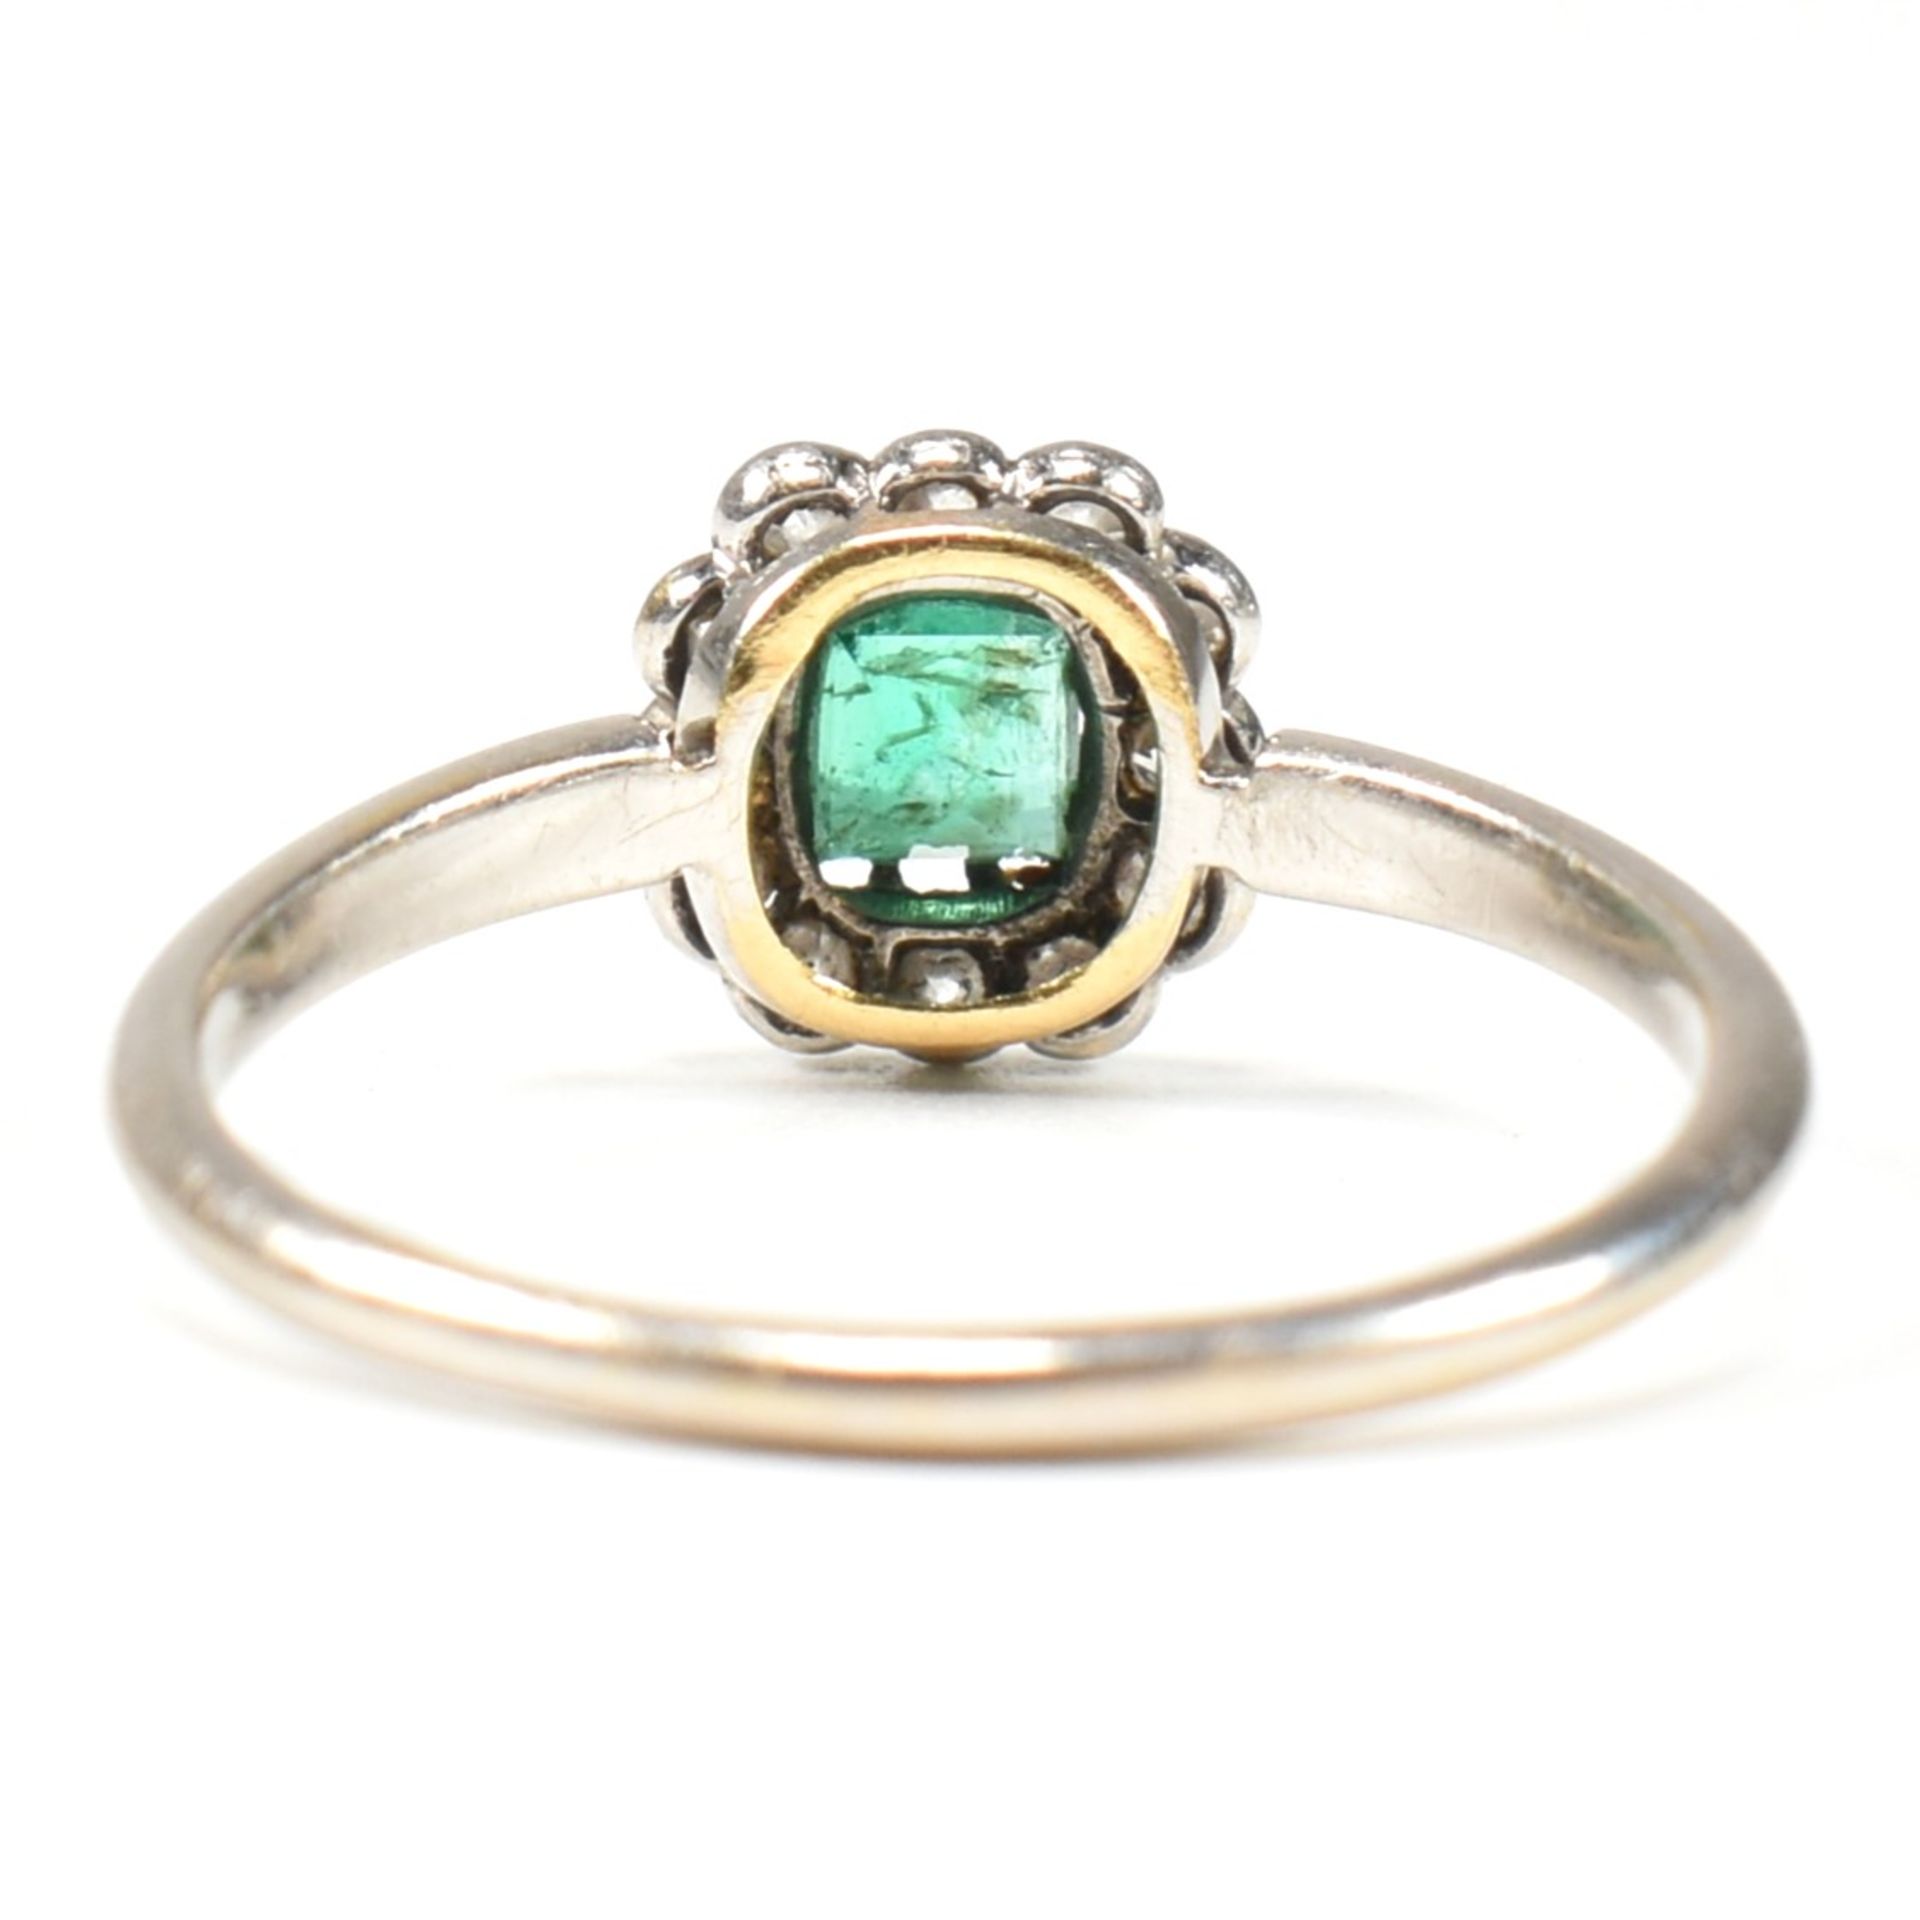 1920S 18CT WHITE GOLD EMERALD & DIAMOND CLUSTER RING - Image 2 of 9